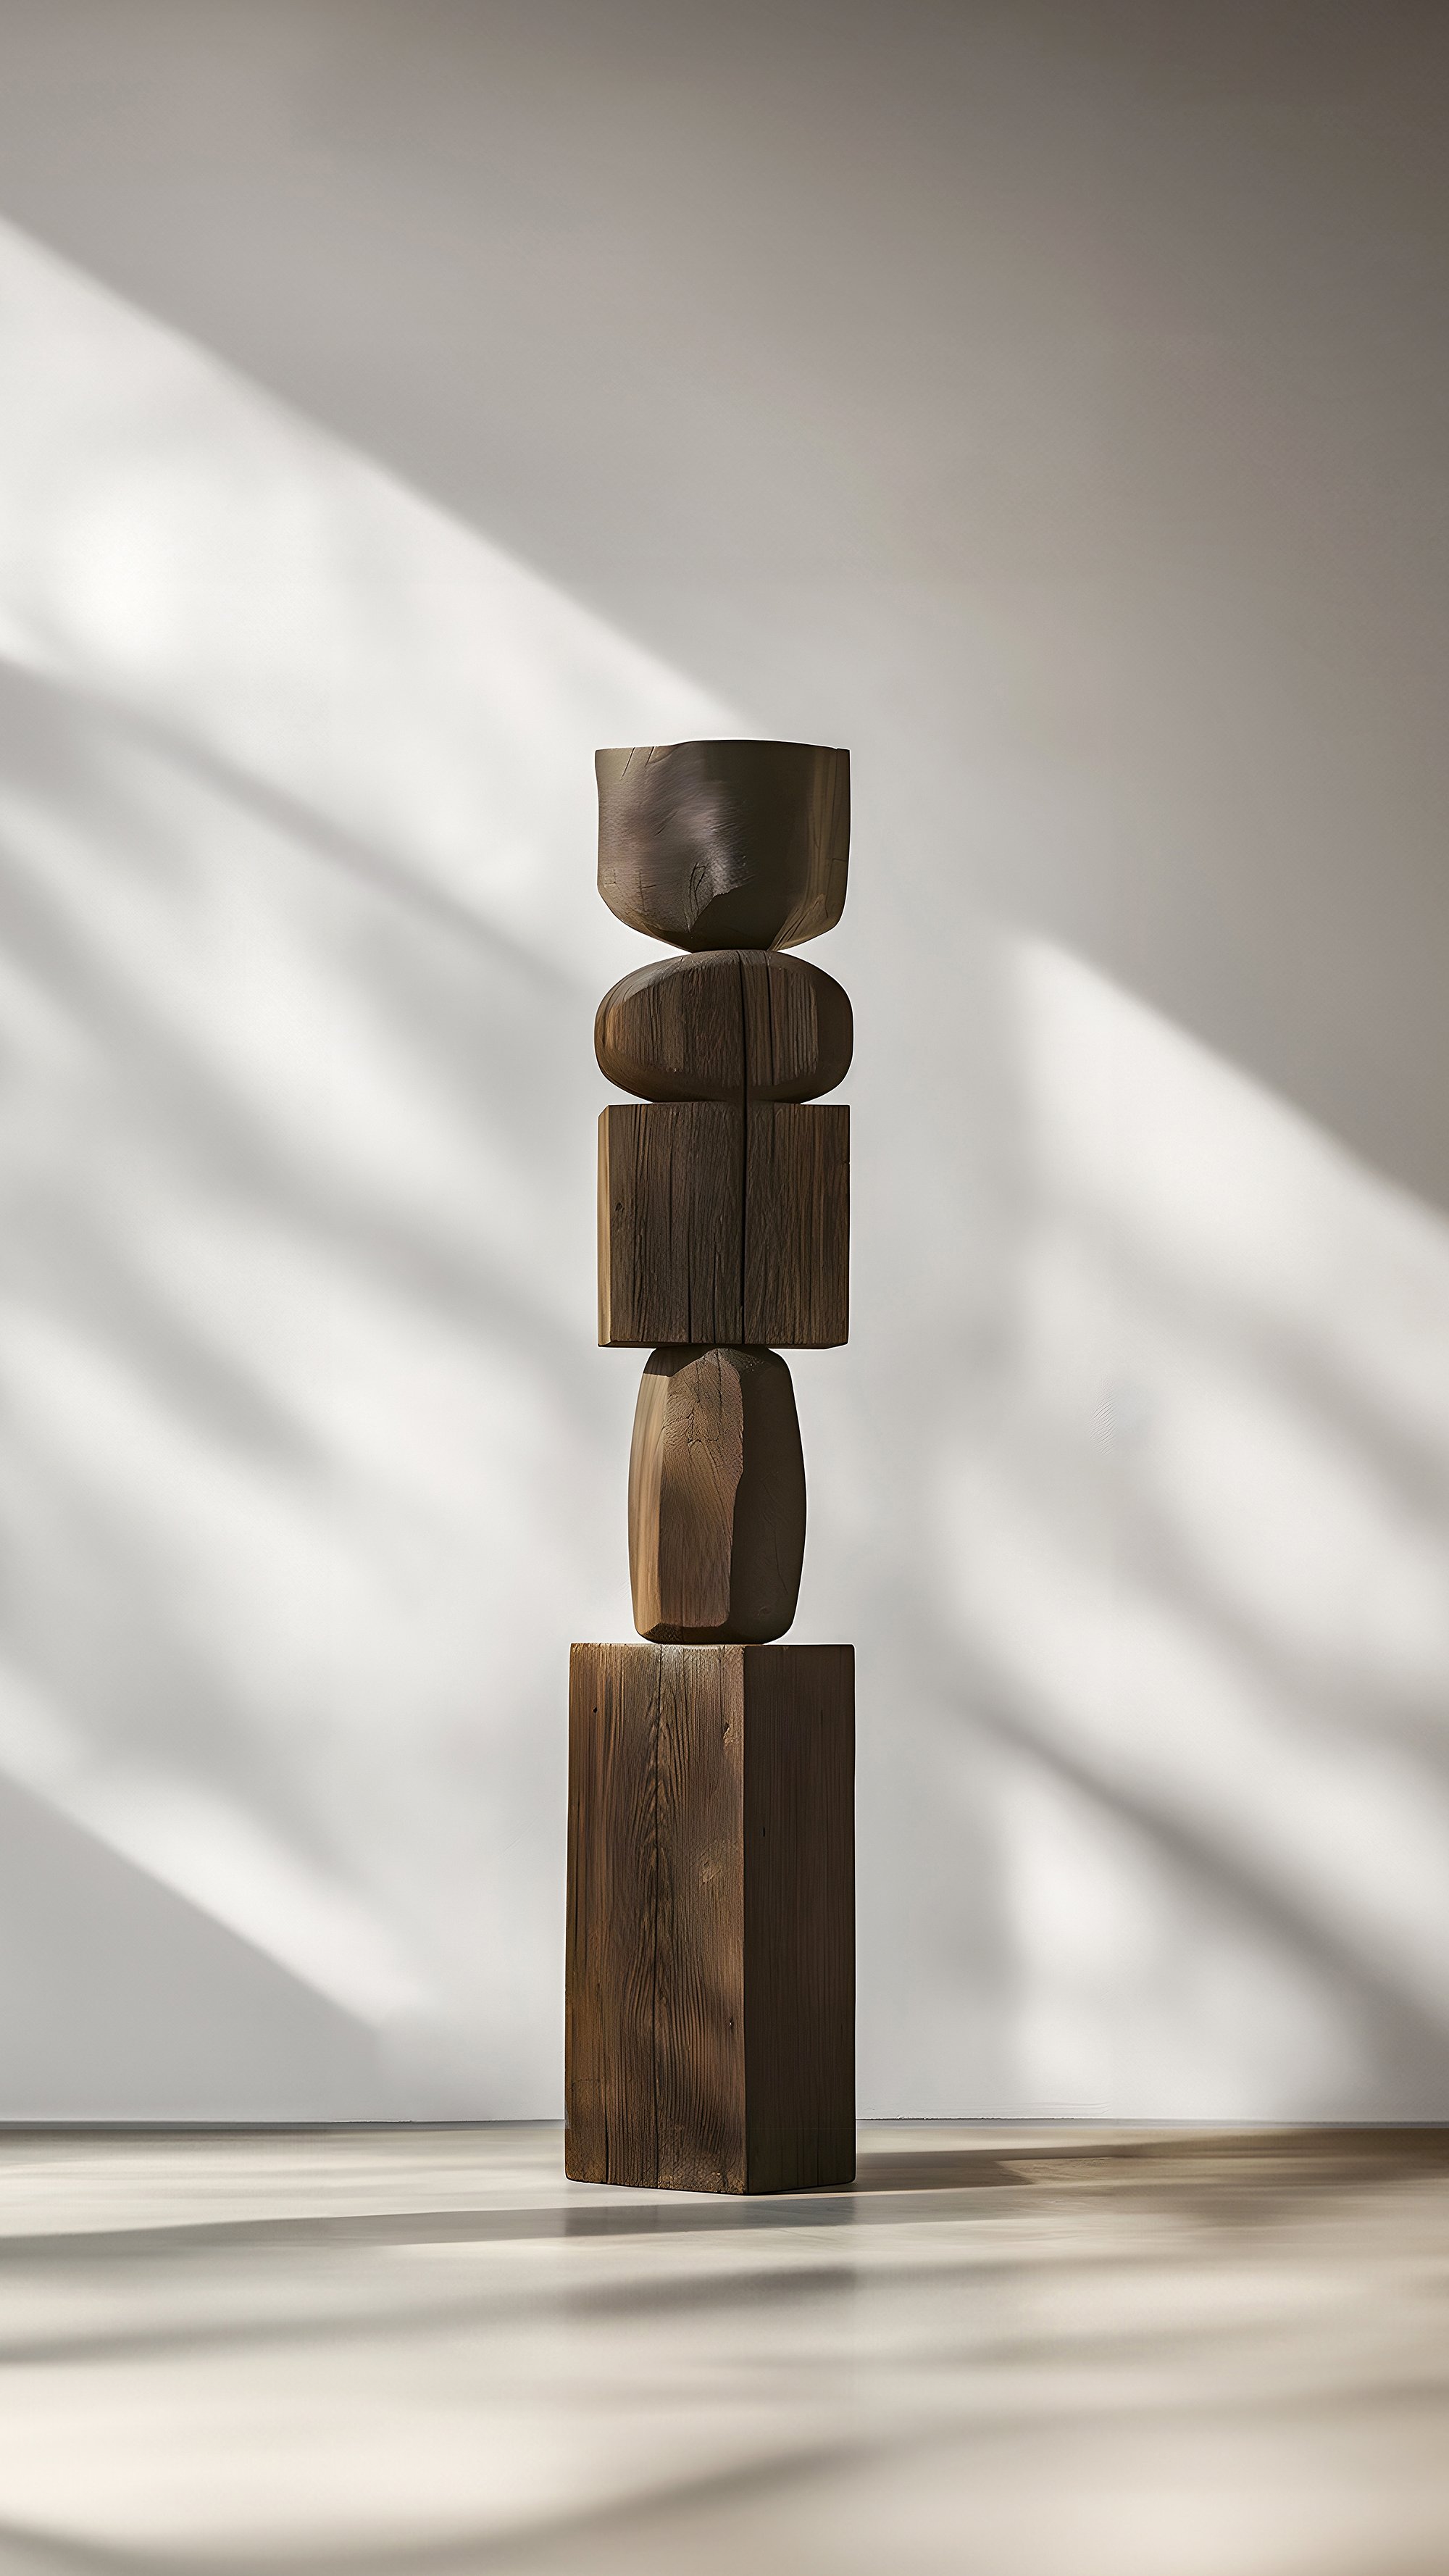 Burned Oak Sculpture, Abstract Elegance by Escalona, Captured in Still Stand No85 -4.jpg